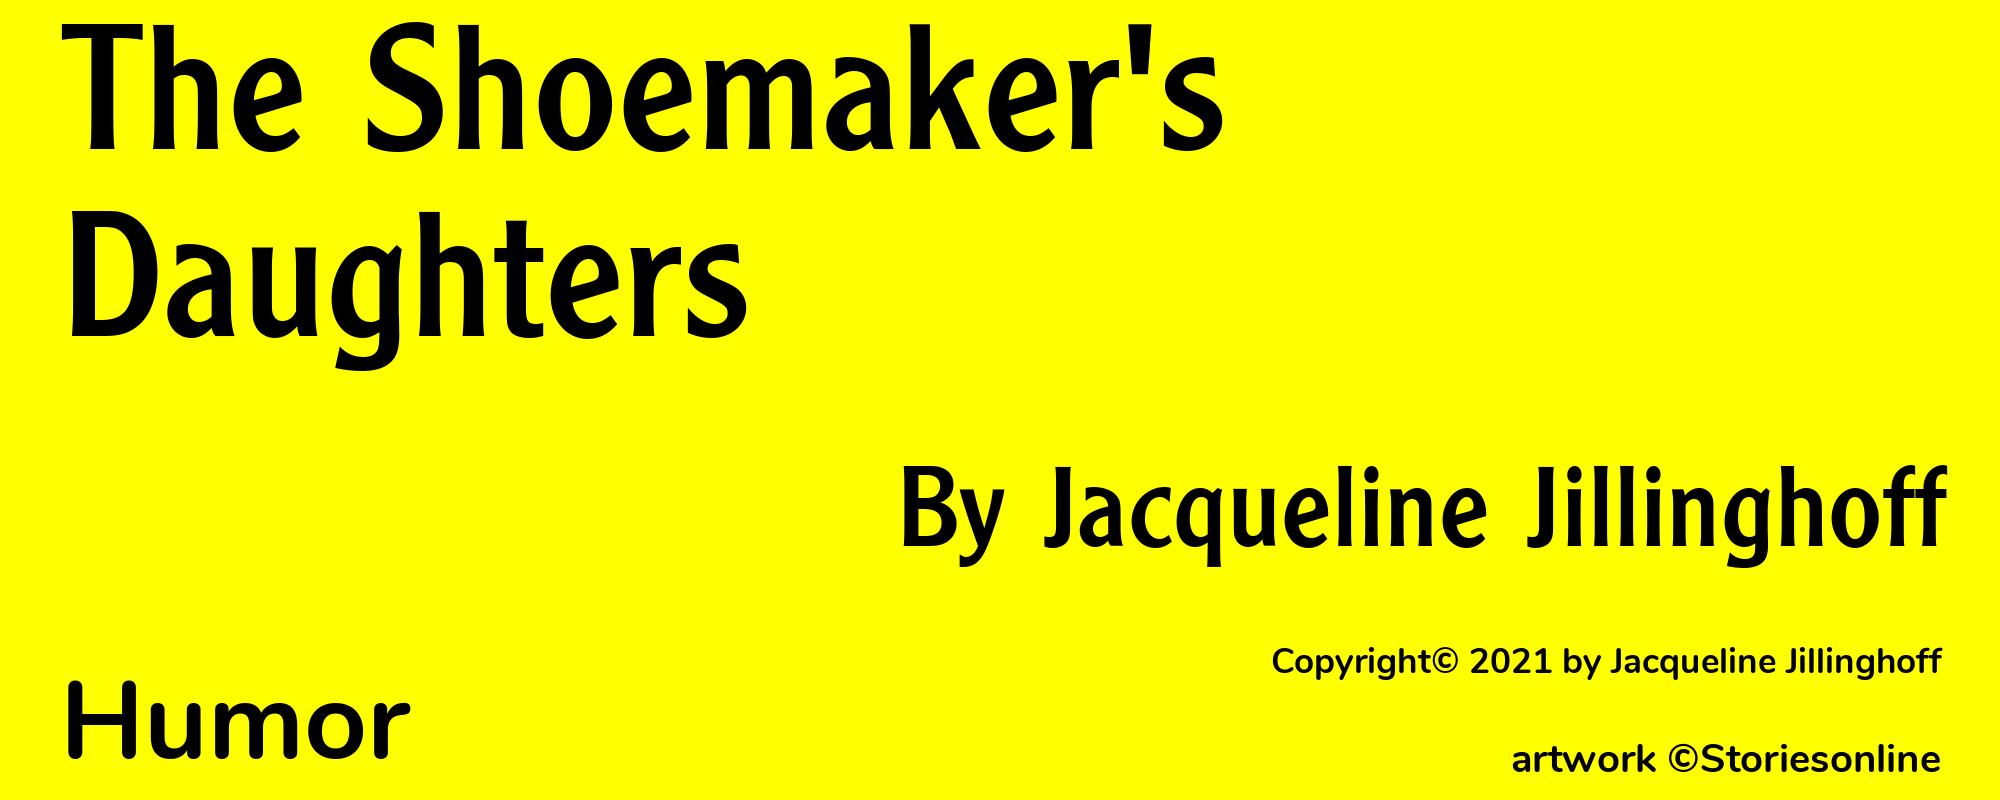 The Shoemaker's Daughters - Cover